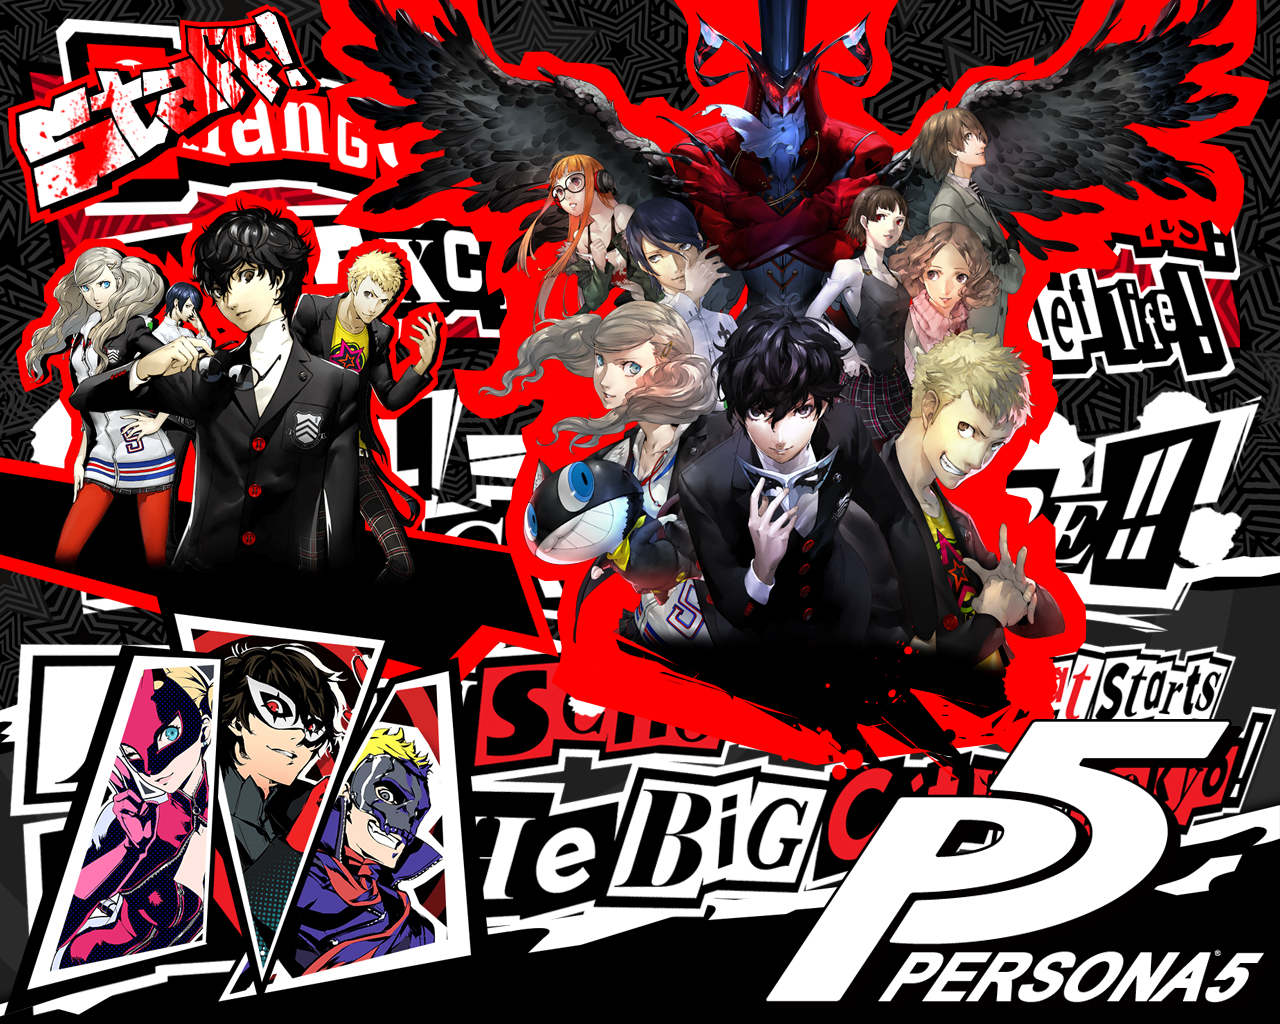 PERSONA 5 - All Characters with P5 Logo - Fan Art by uzijin on DeviantArt